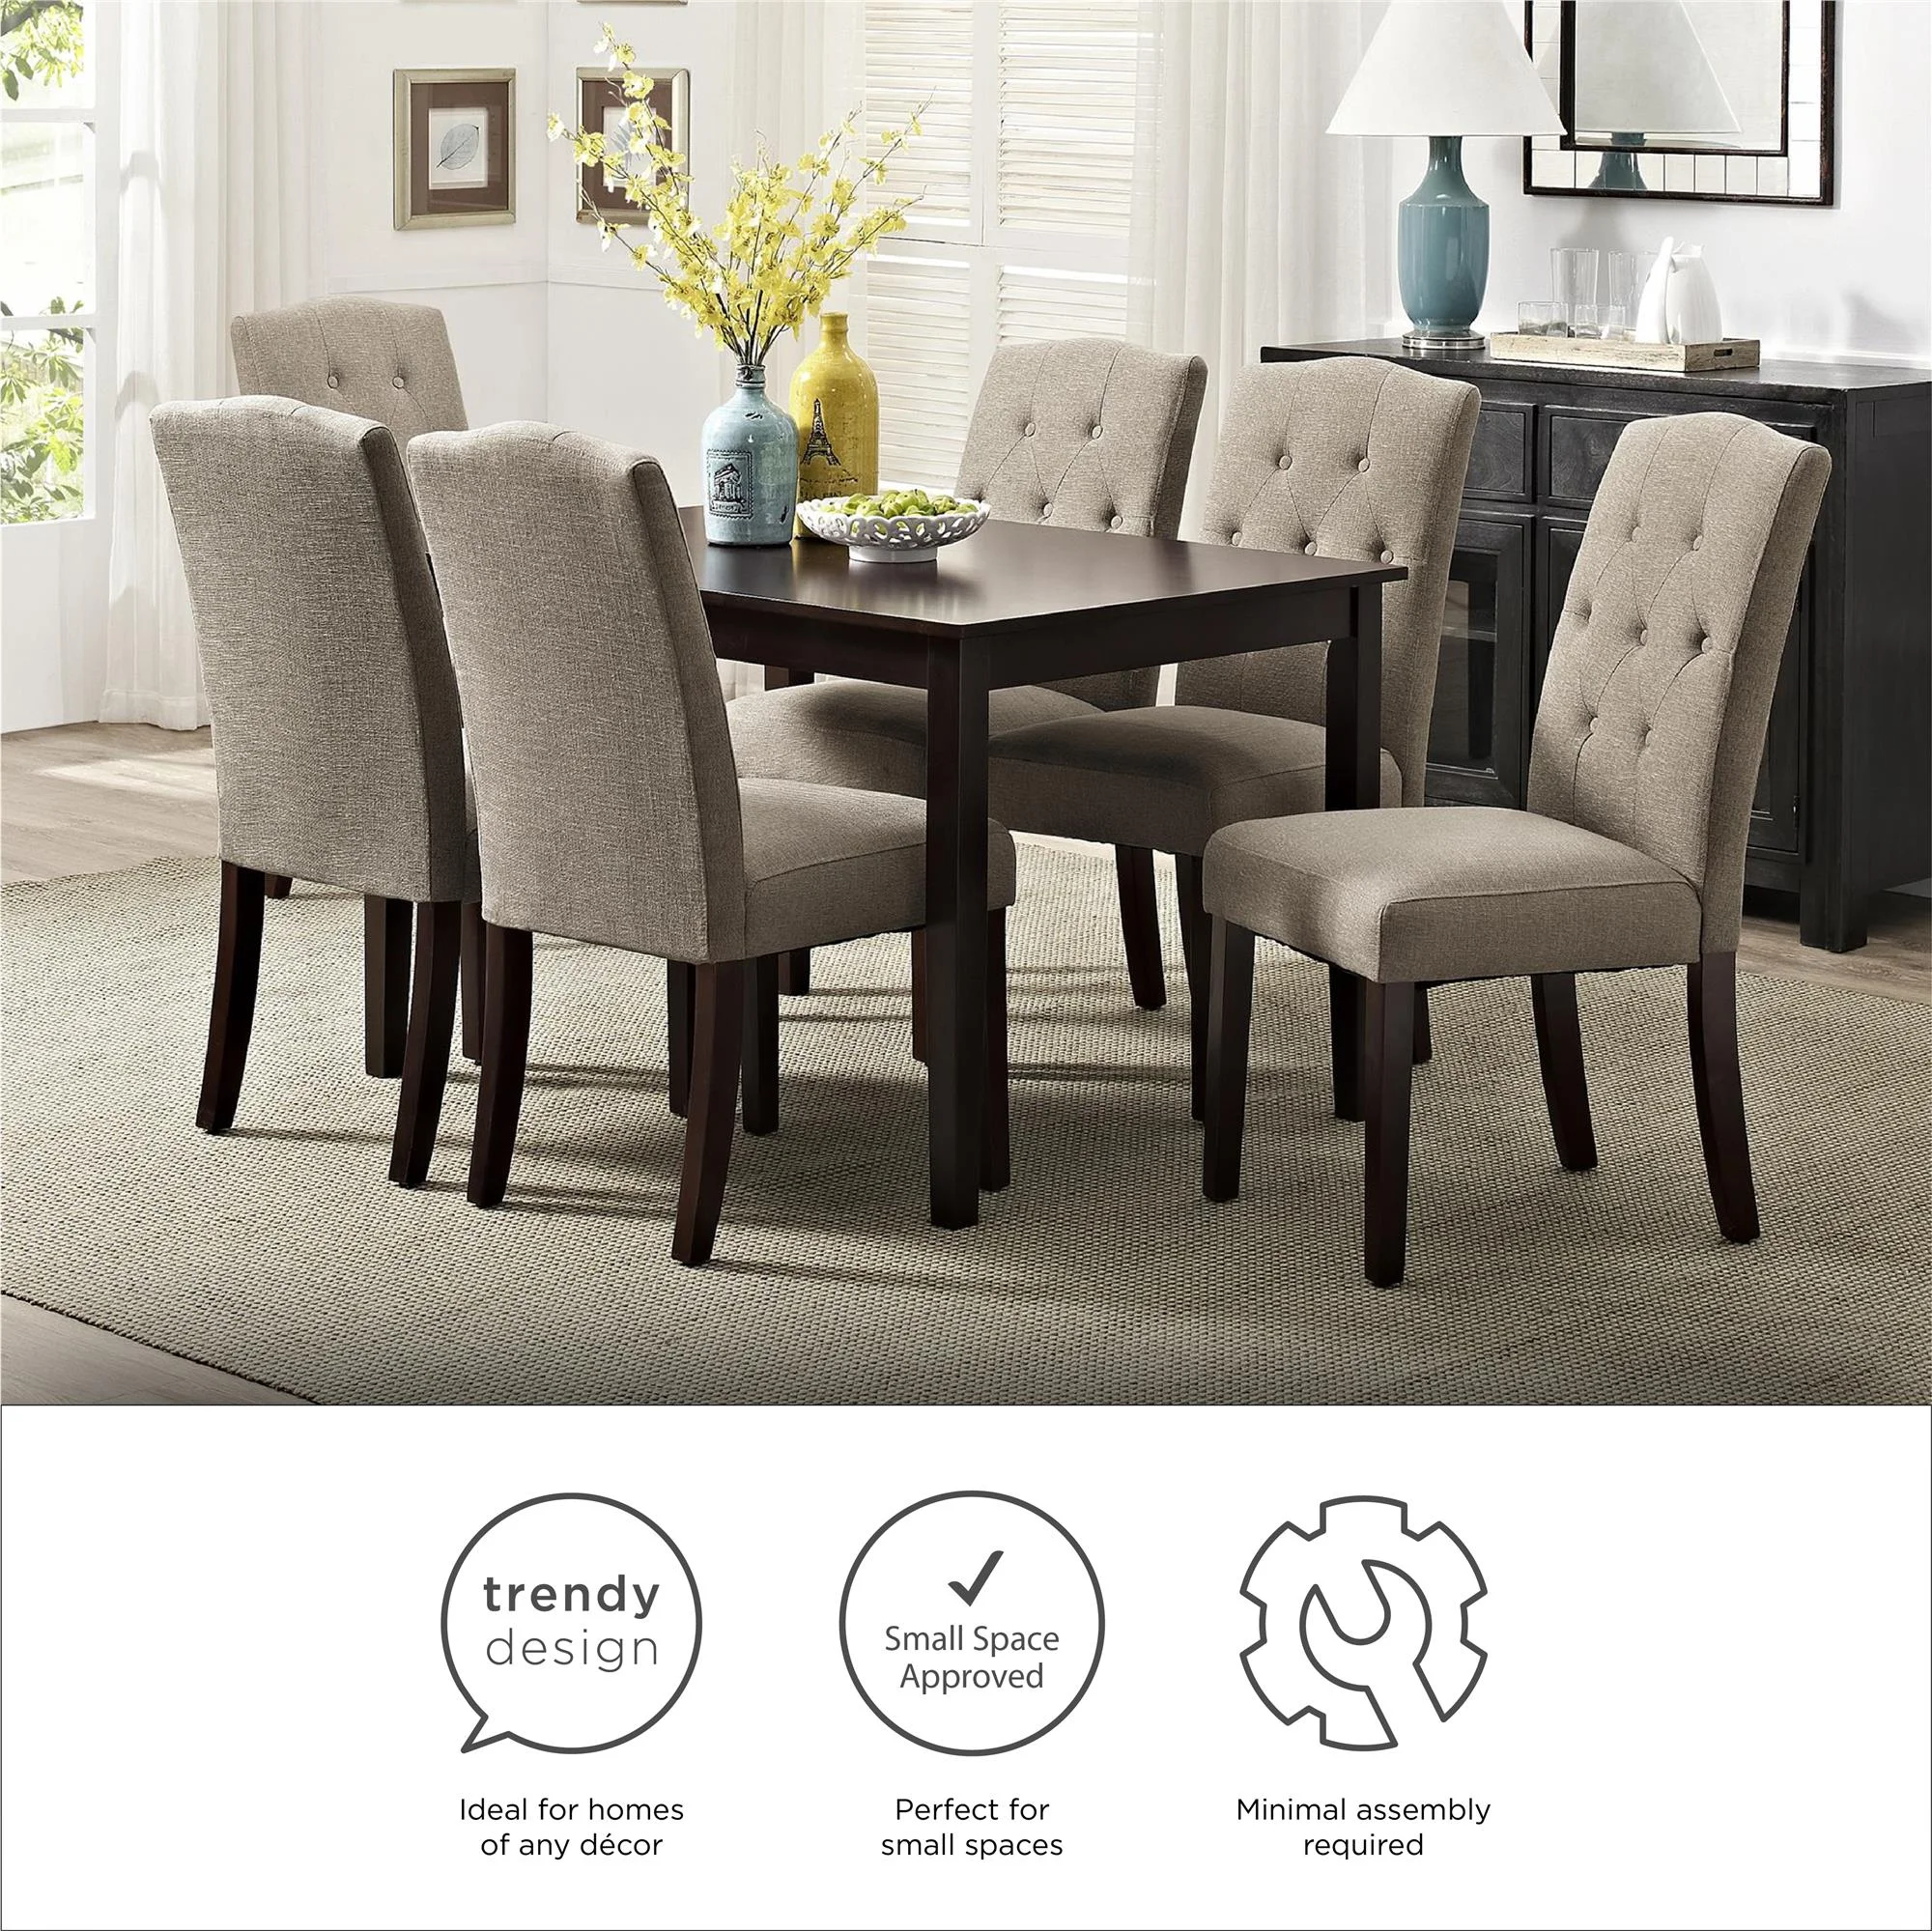 Gardens Parsons Tufted Dining Chair, Bhg Parsons Dining Room Table Chair Beige